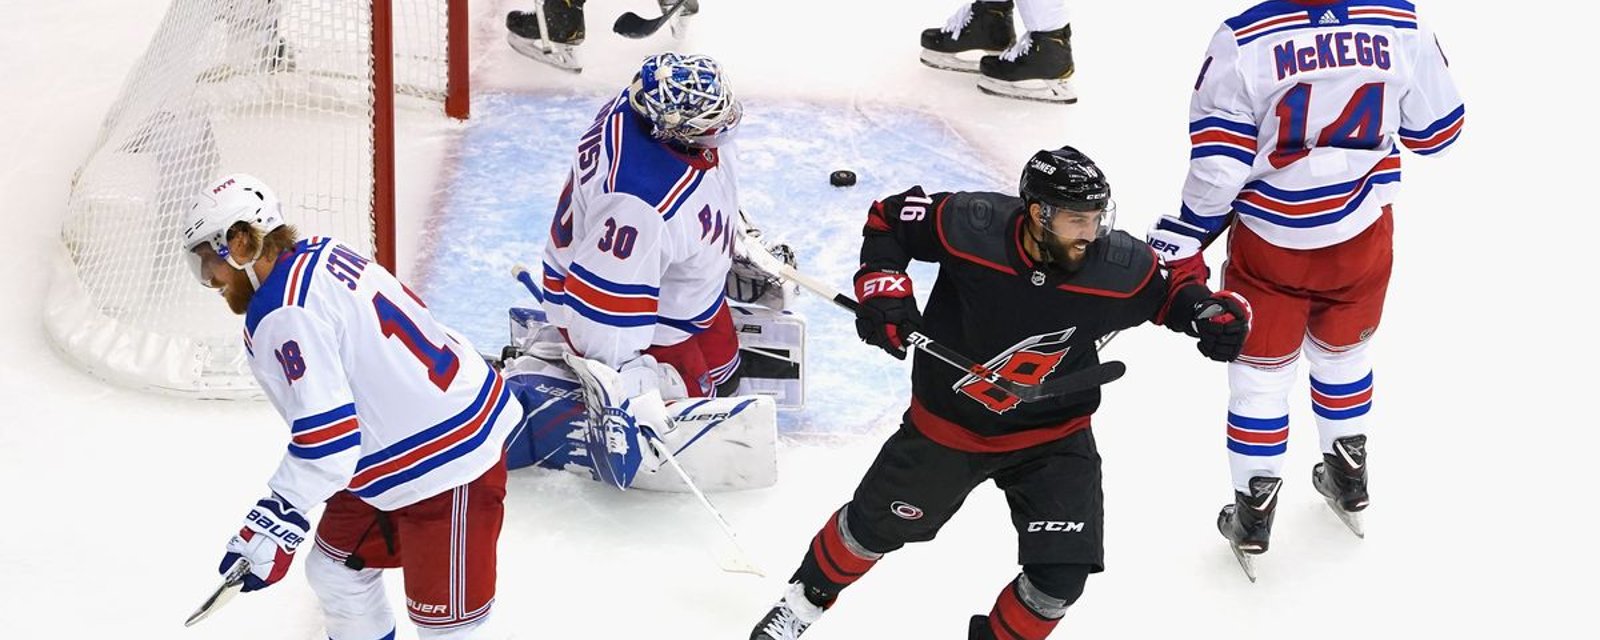 Hurricanes kick the Rangers when they’re down! 